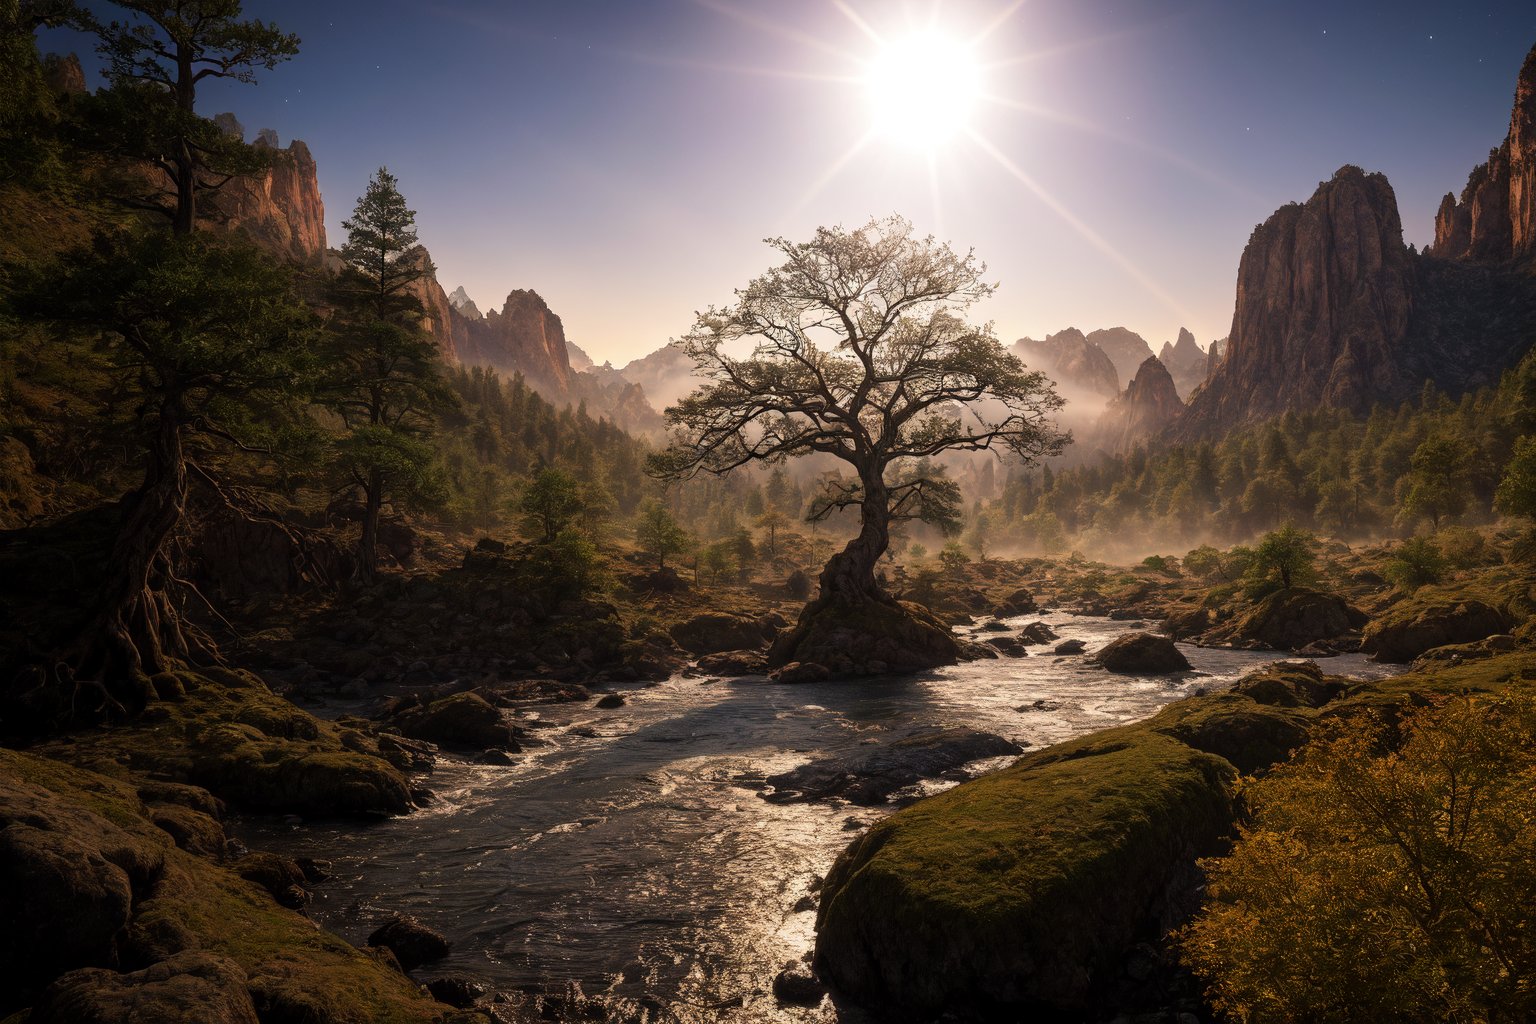 In a photorealistic fantasy landscape, a majestic gnarled tree stands tall beneath a radiant sunlit sky. Its twisted branches stretch towards the heavens like nature's own cathedral, framing the serene scene. In the distance, an alien figure rises from the misty river, its bioluminescent scales shimmering in harmony with the lunar glow. The mountains rise up in the background, their rugged peaks softened by a veil of morning mist. A water fall cascades down one slope, creating a mesmerizing display of light and sound that harmonizes with the ethereal atmosphere.